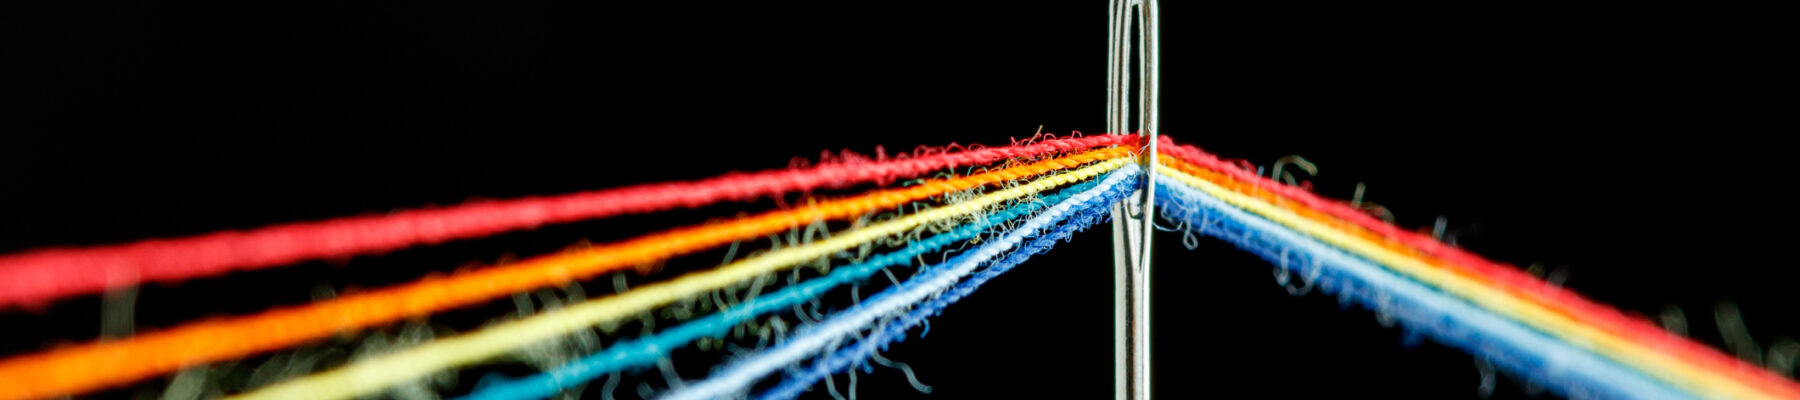 multi-colored threads for sewing in the form of a rainbow pass through an antique needle on a black background close-up